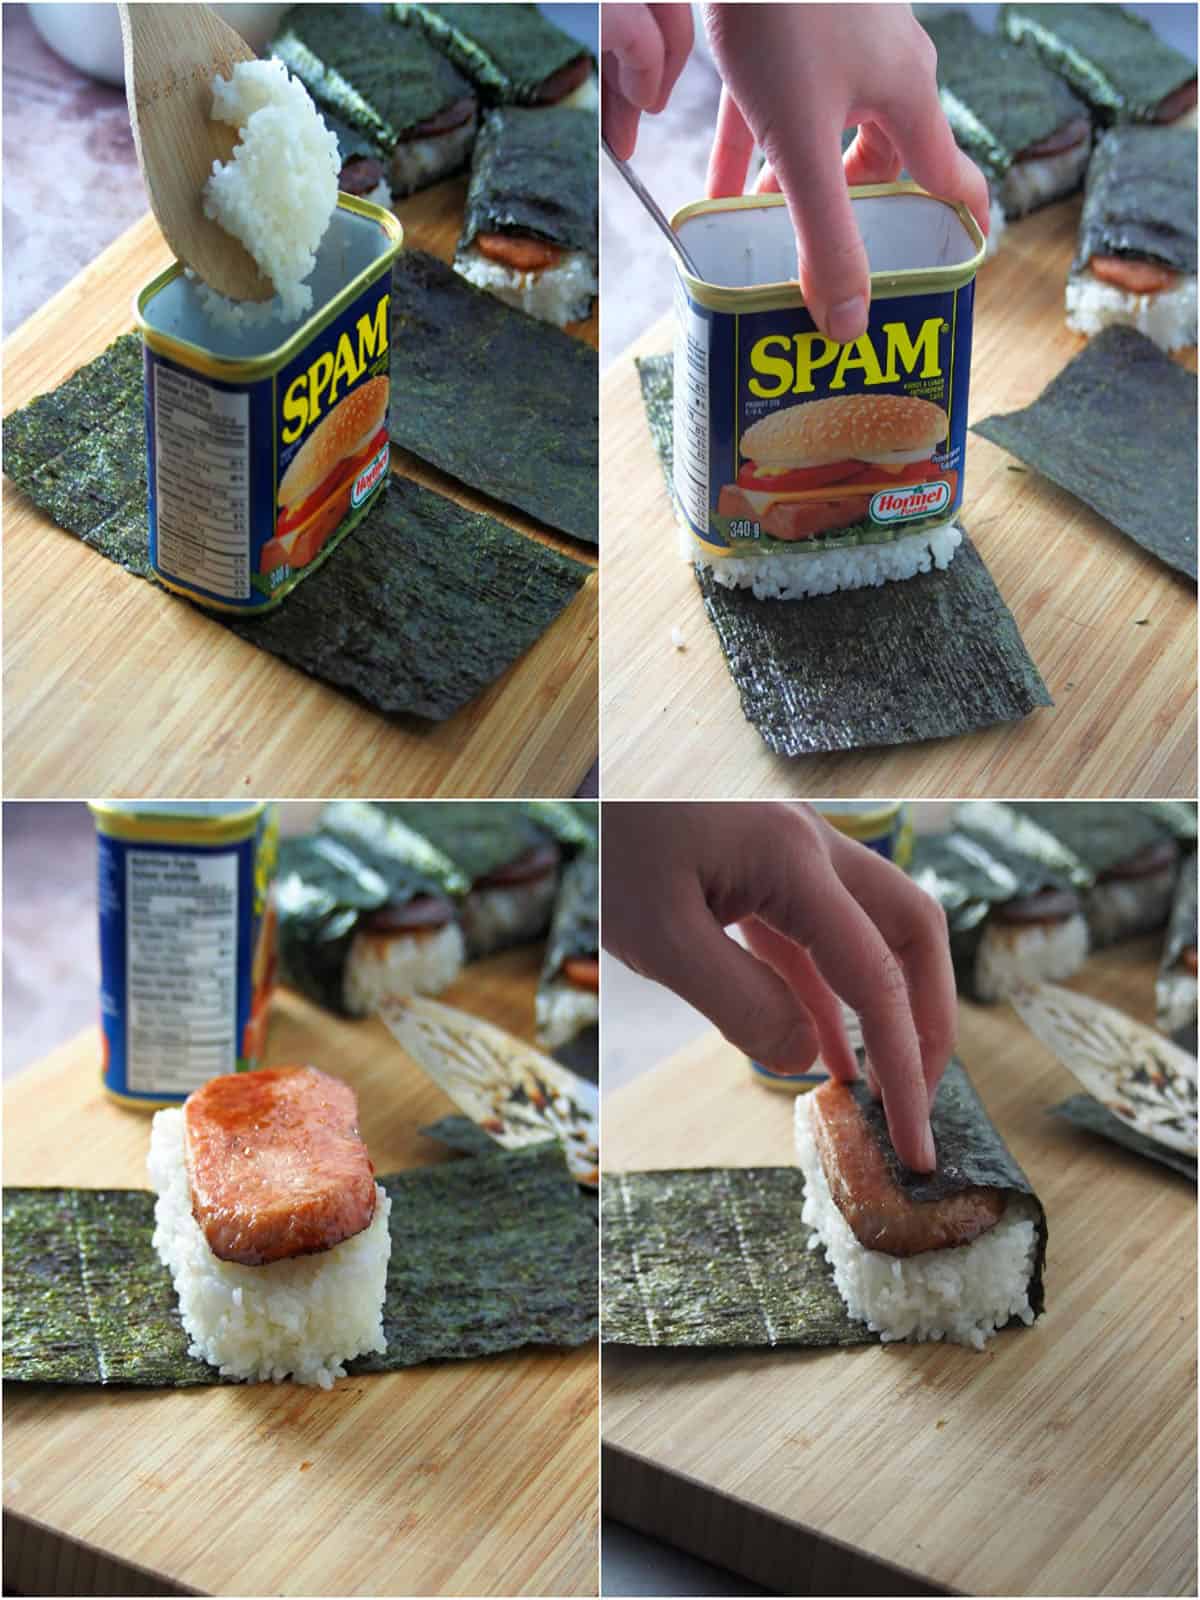 step by step guide on making spam musubi